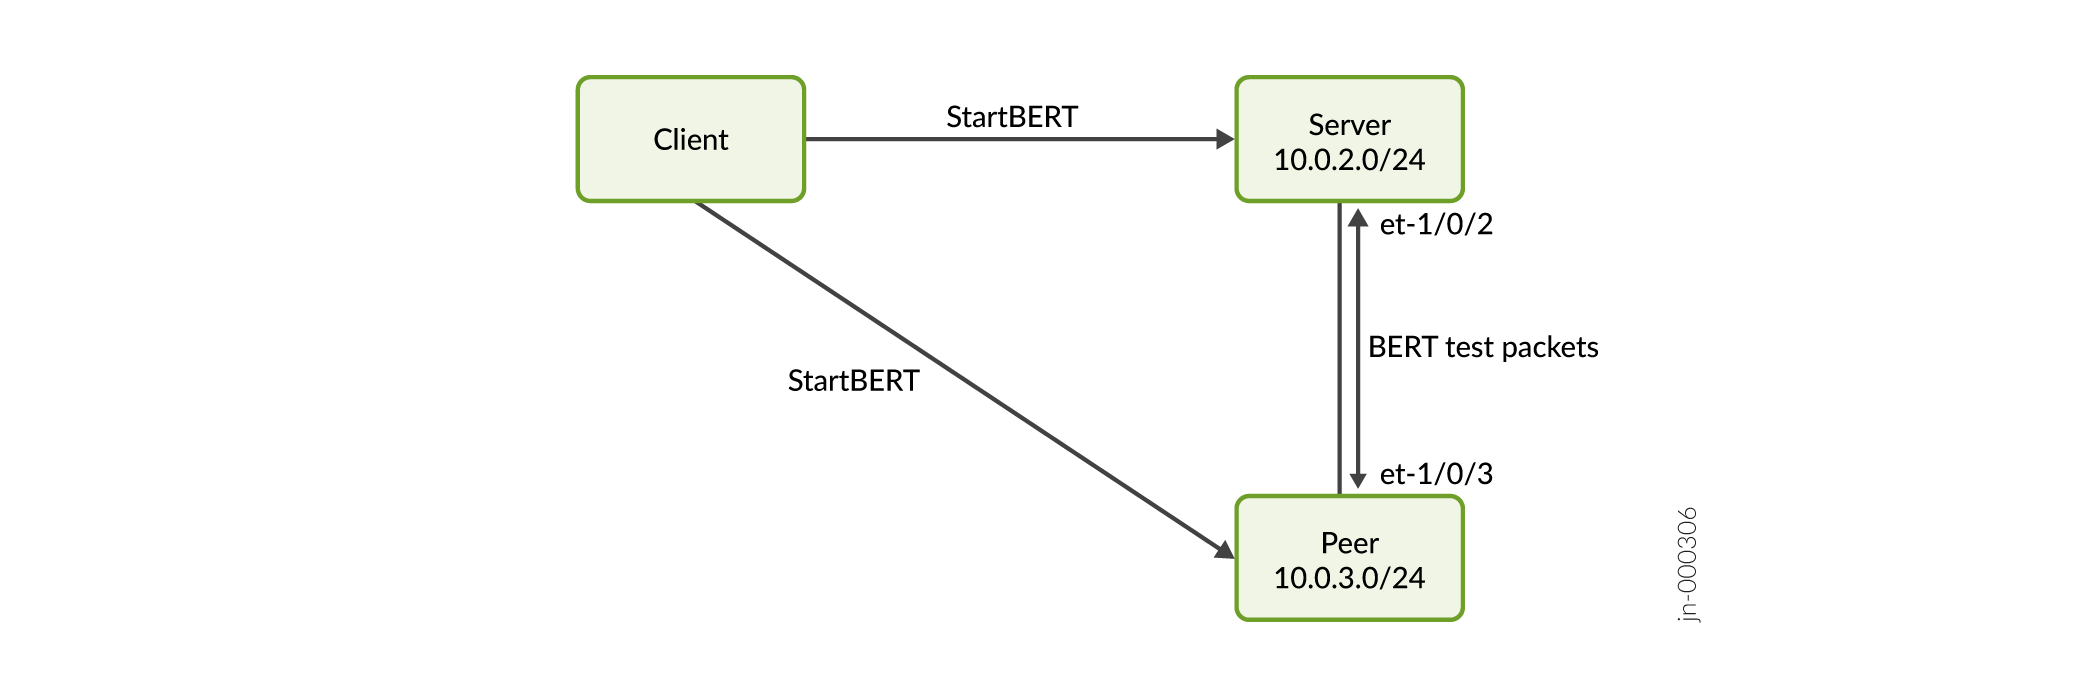 Network Topology During the BERT